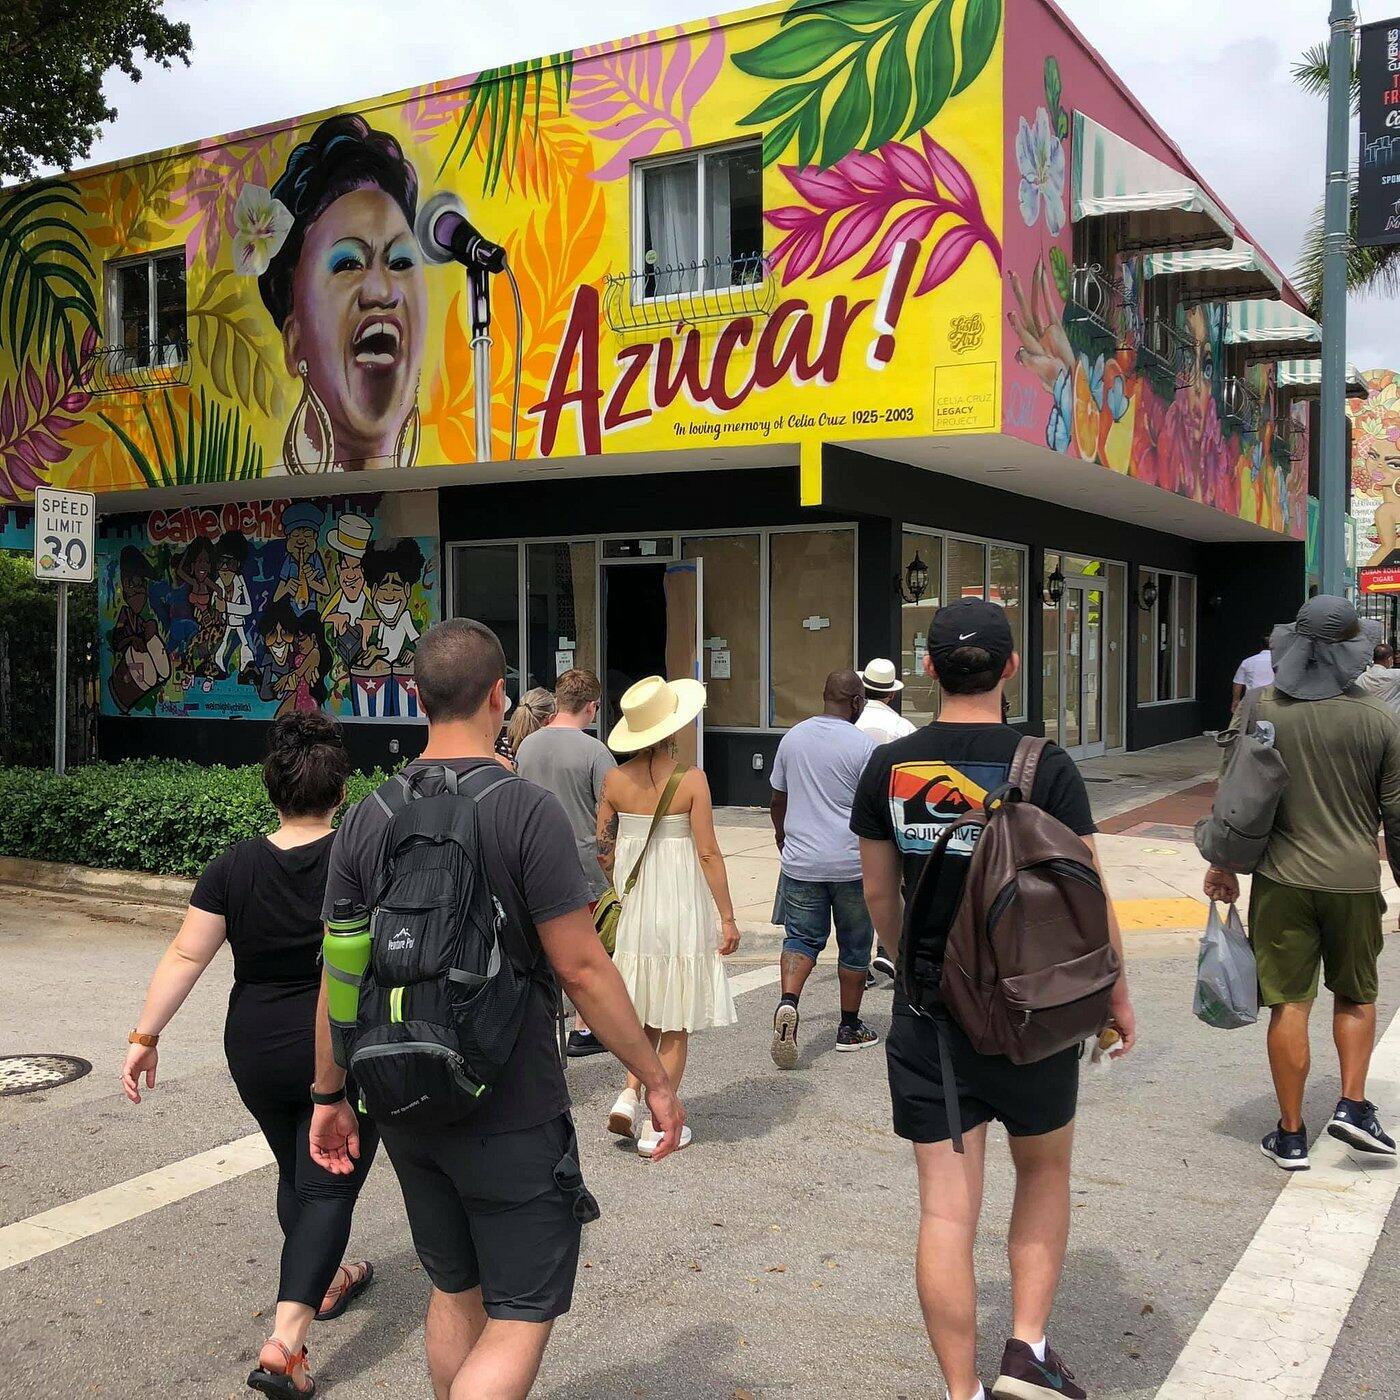 A group of people on a Miami Food Tour walk past a colorful mural on a building.